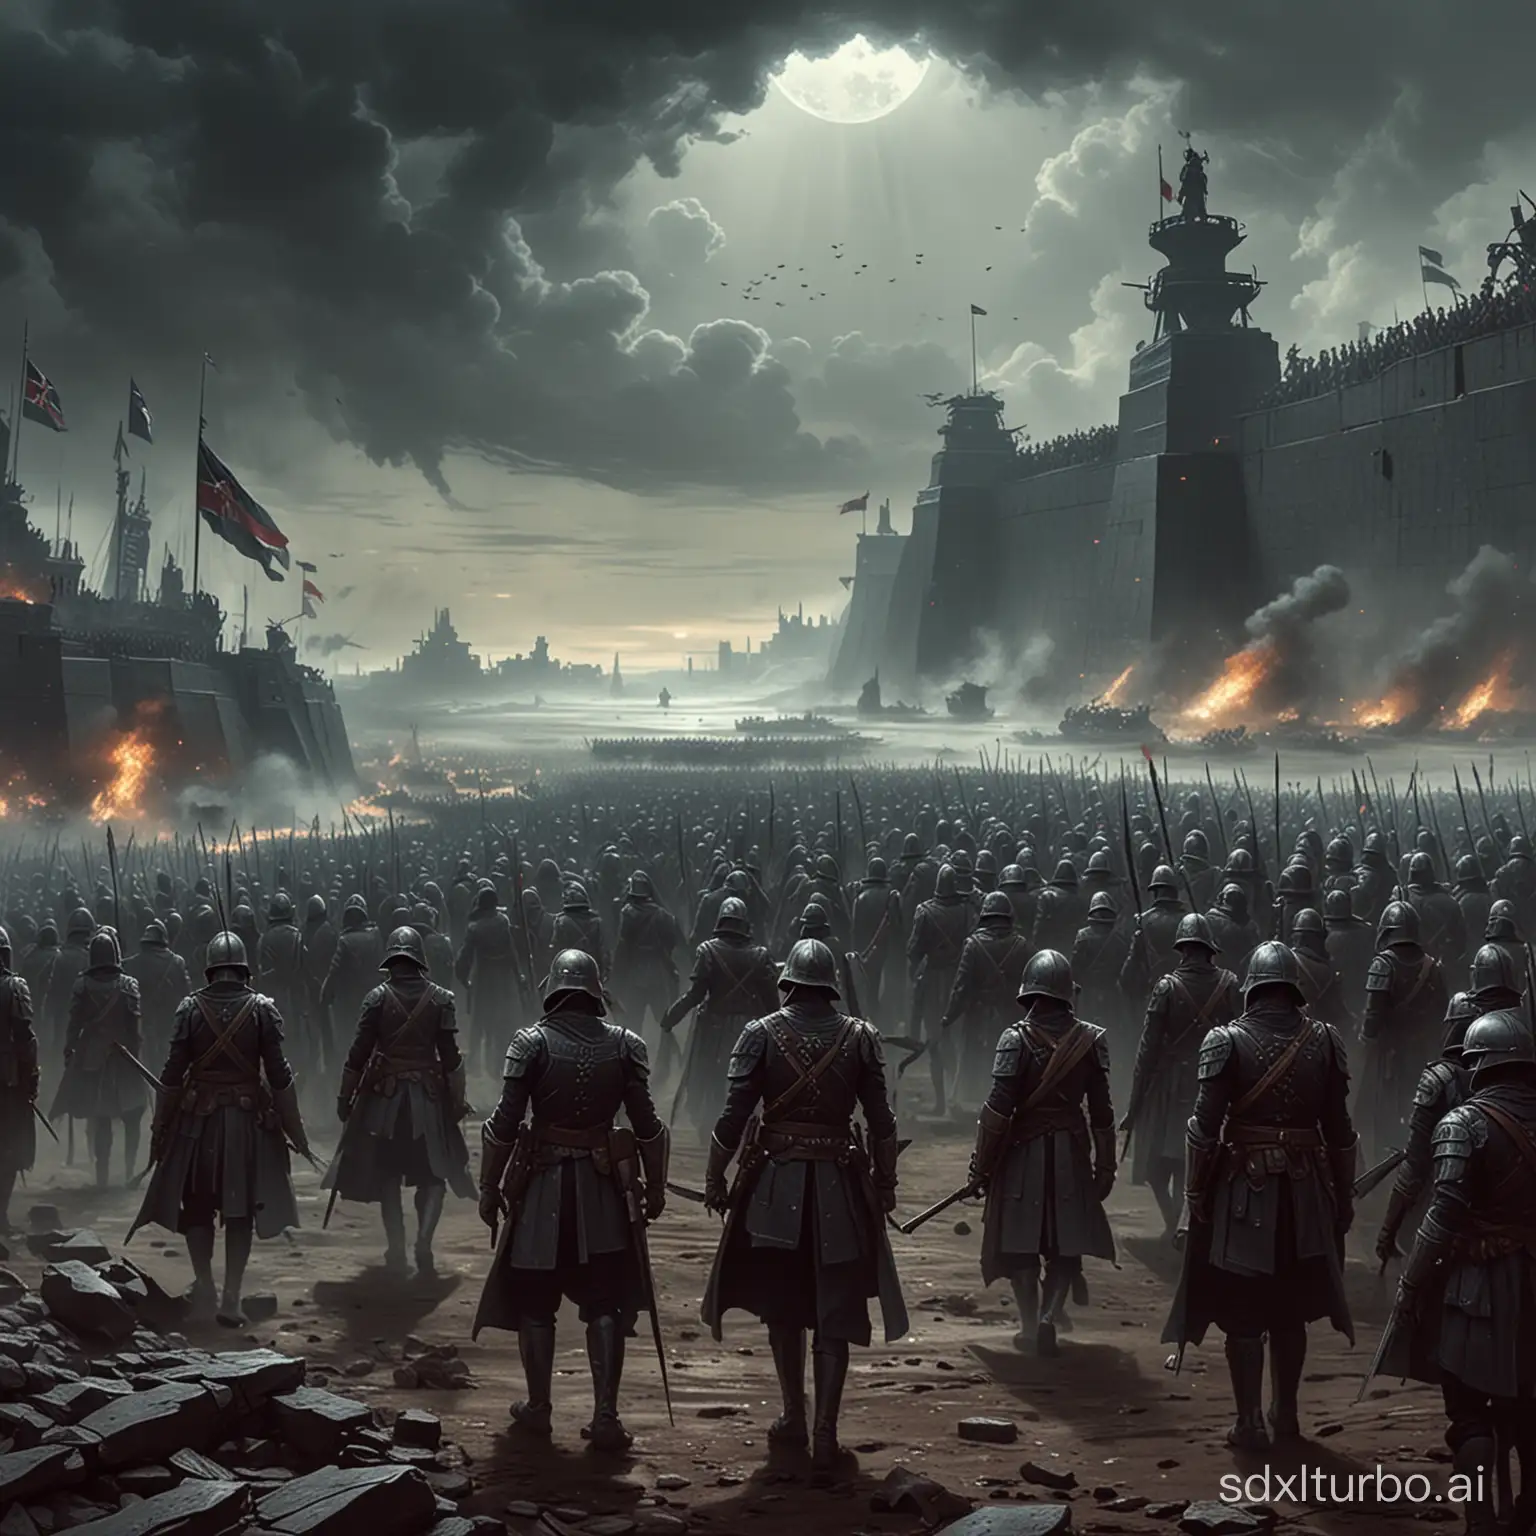 Draw a revolutionary army being reviewed by a dark ruler, the scene should feel futuristic and awe-inspiring.